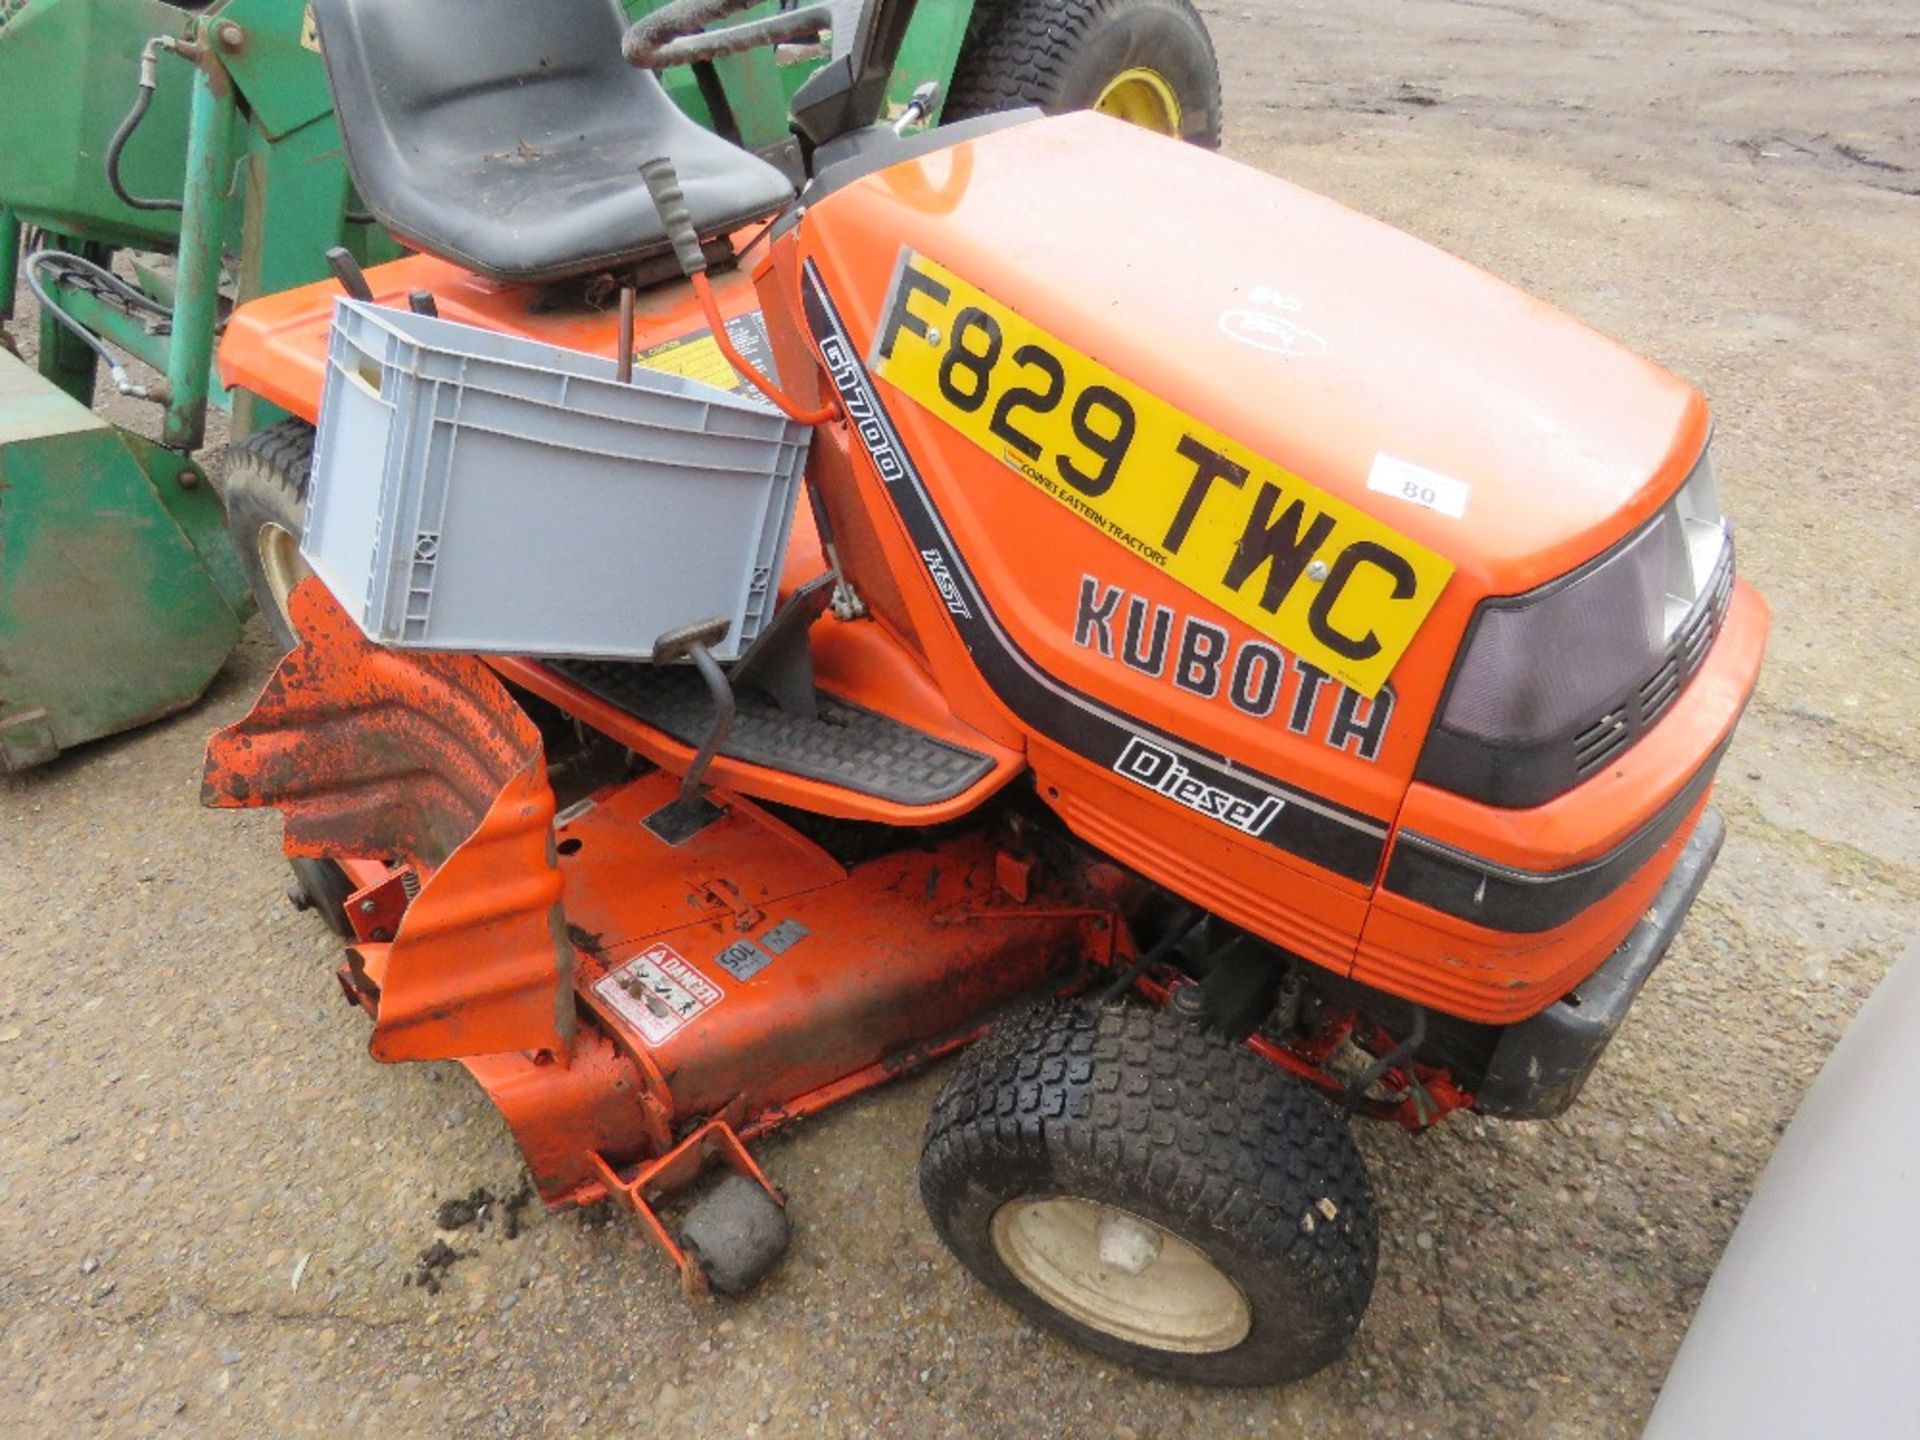 KUBOTA G1700 HST DIESEL RIDE ON MOWER. ENGINE PARTLY STRIPPED, AS SHOWN, SOLD AS UNTESTED/SPARES/REP - Image 2 of 8